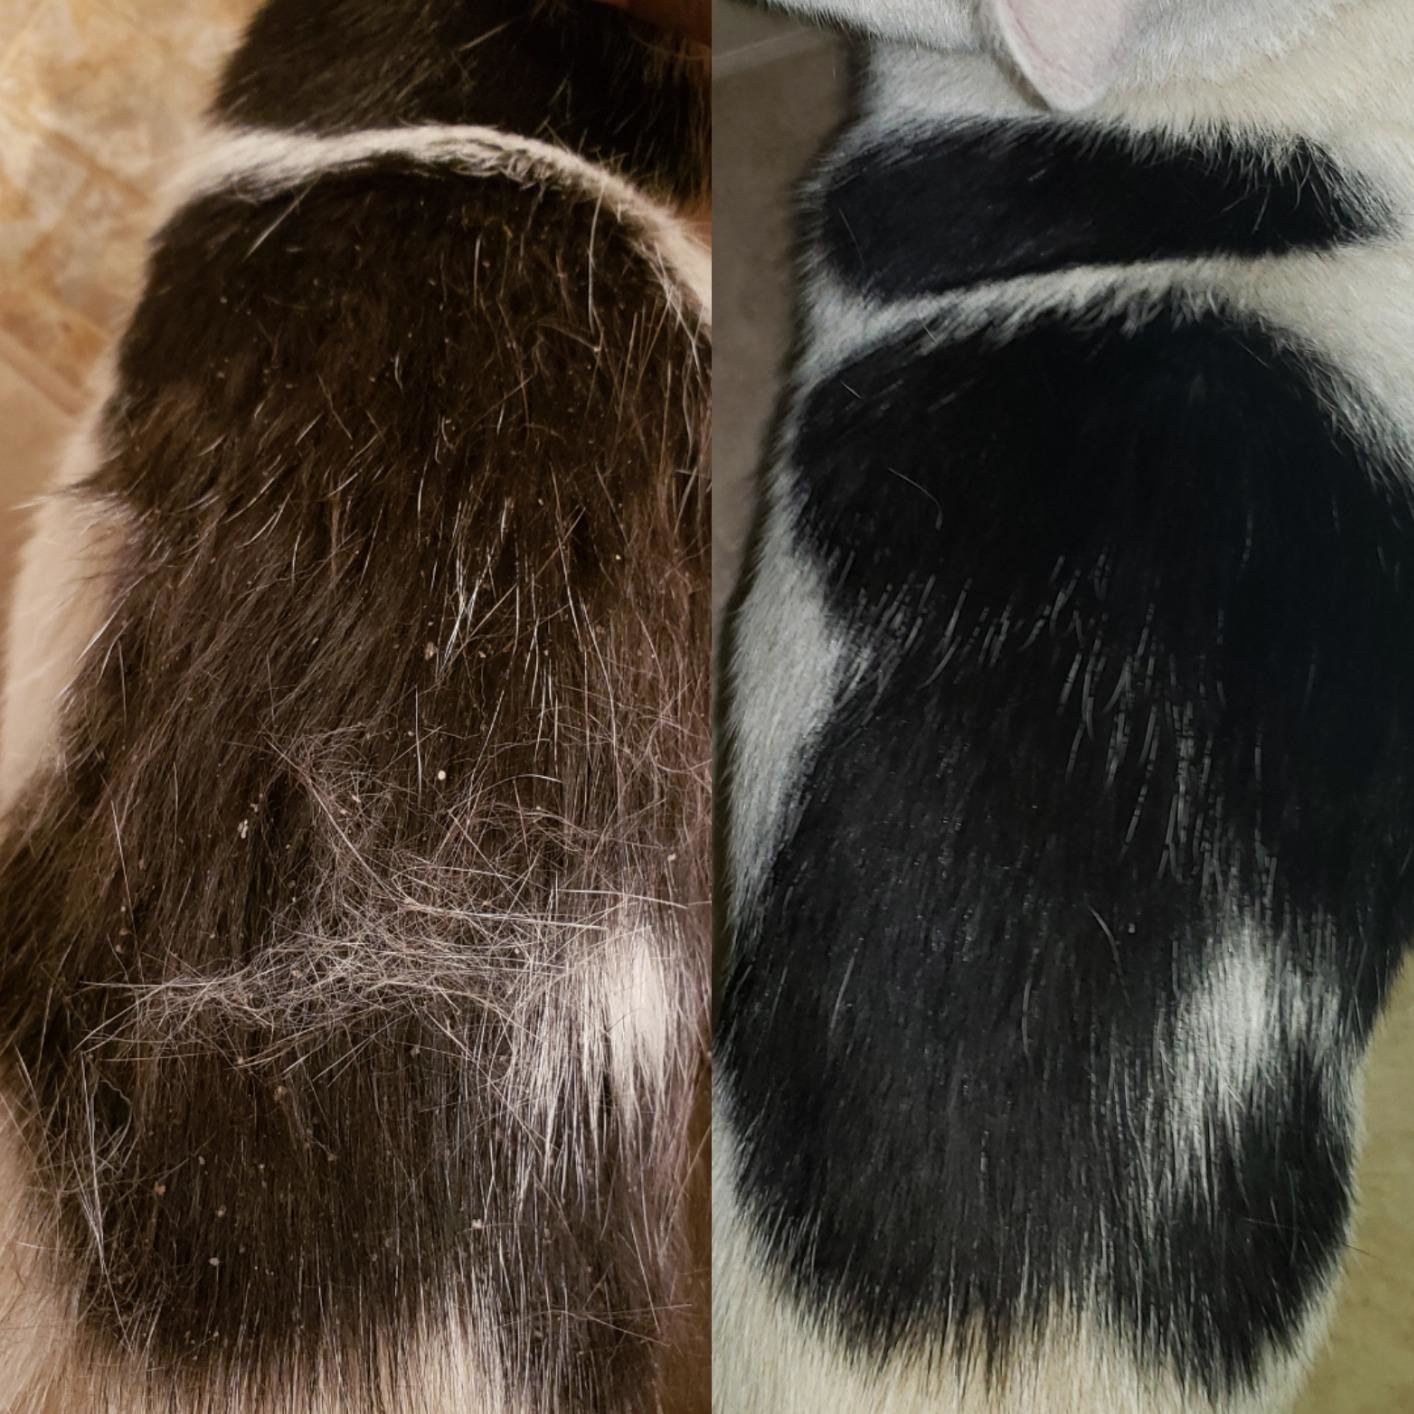 A cat&#x27;s back with dandruff and stray fur on the left and the same cat&#x27;s back dandruff-free and with a smoother looking coat on the right